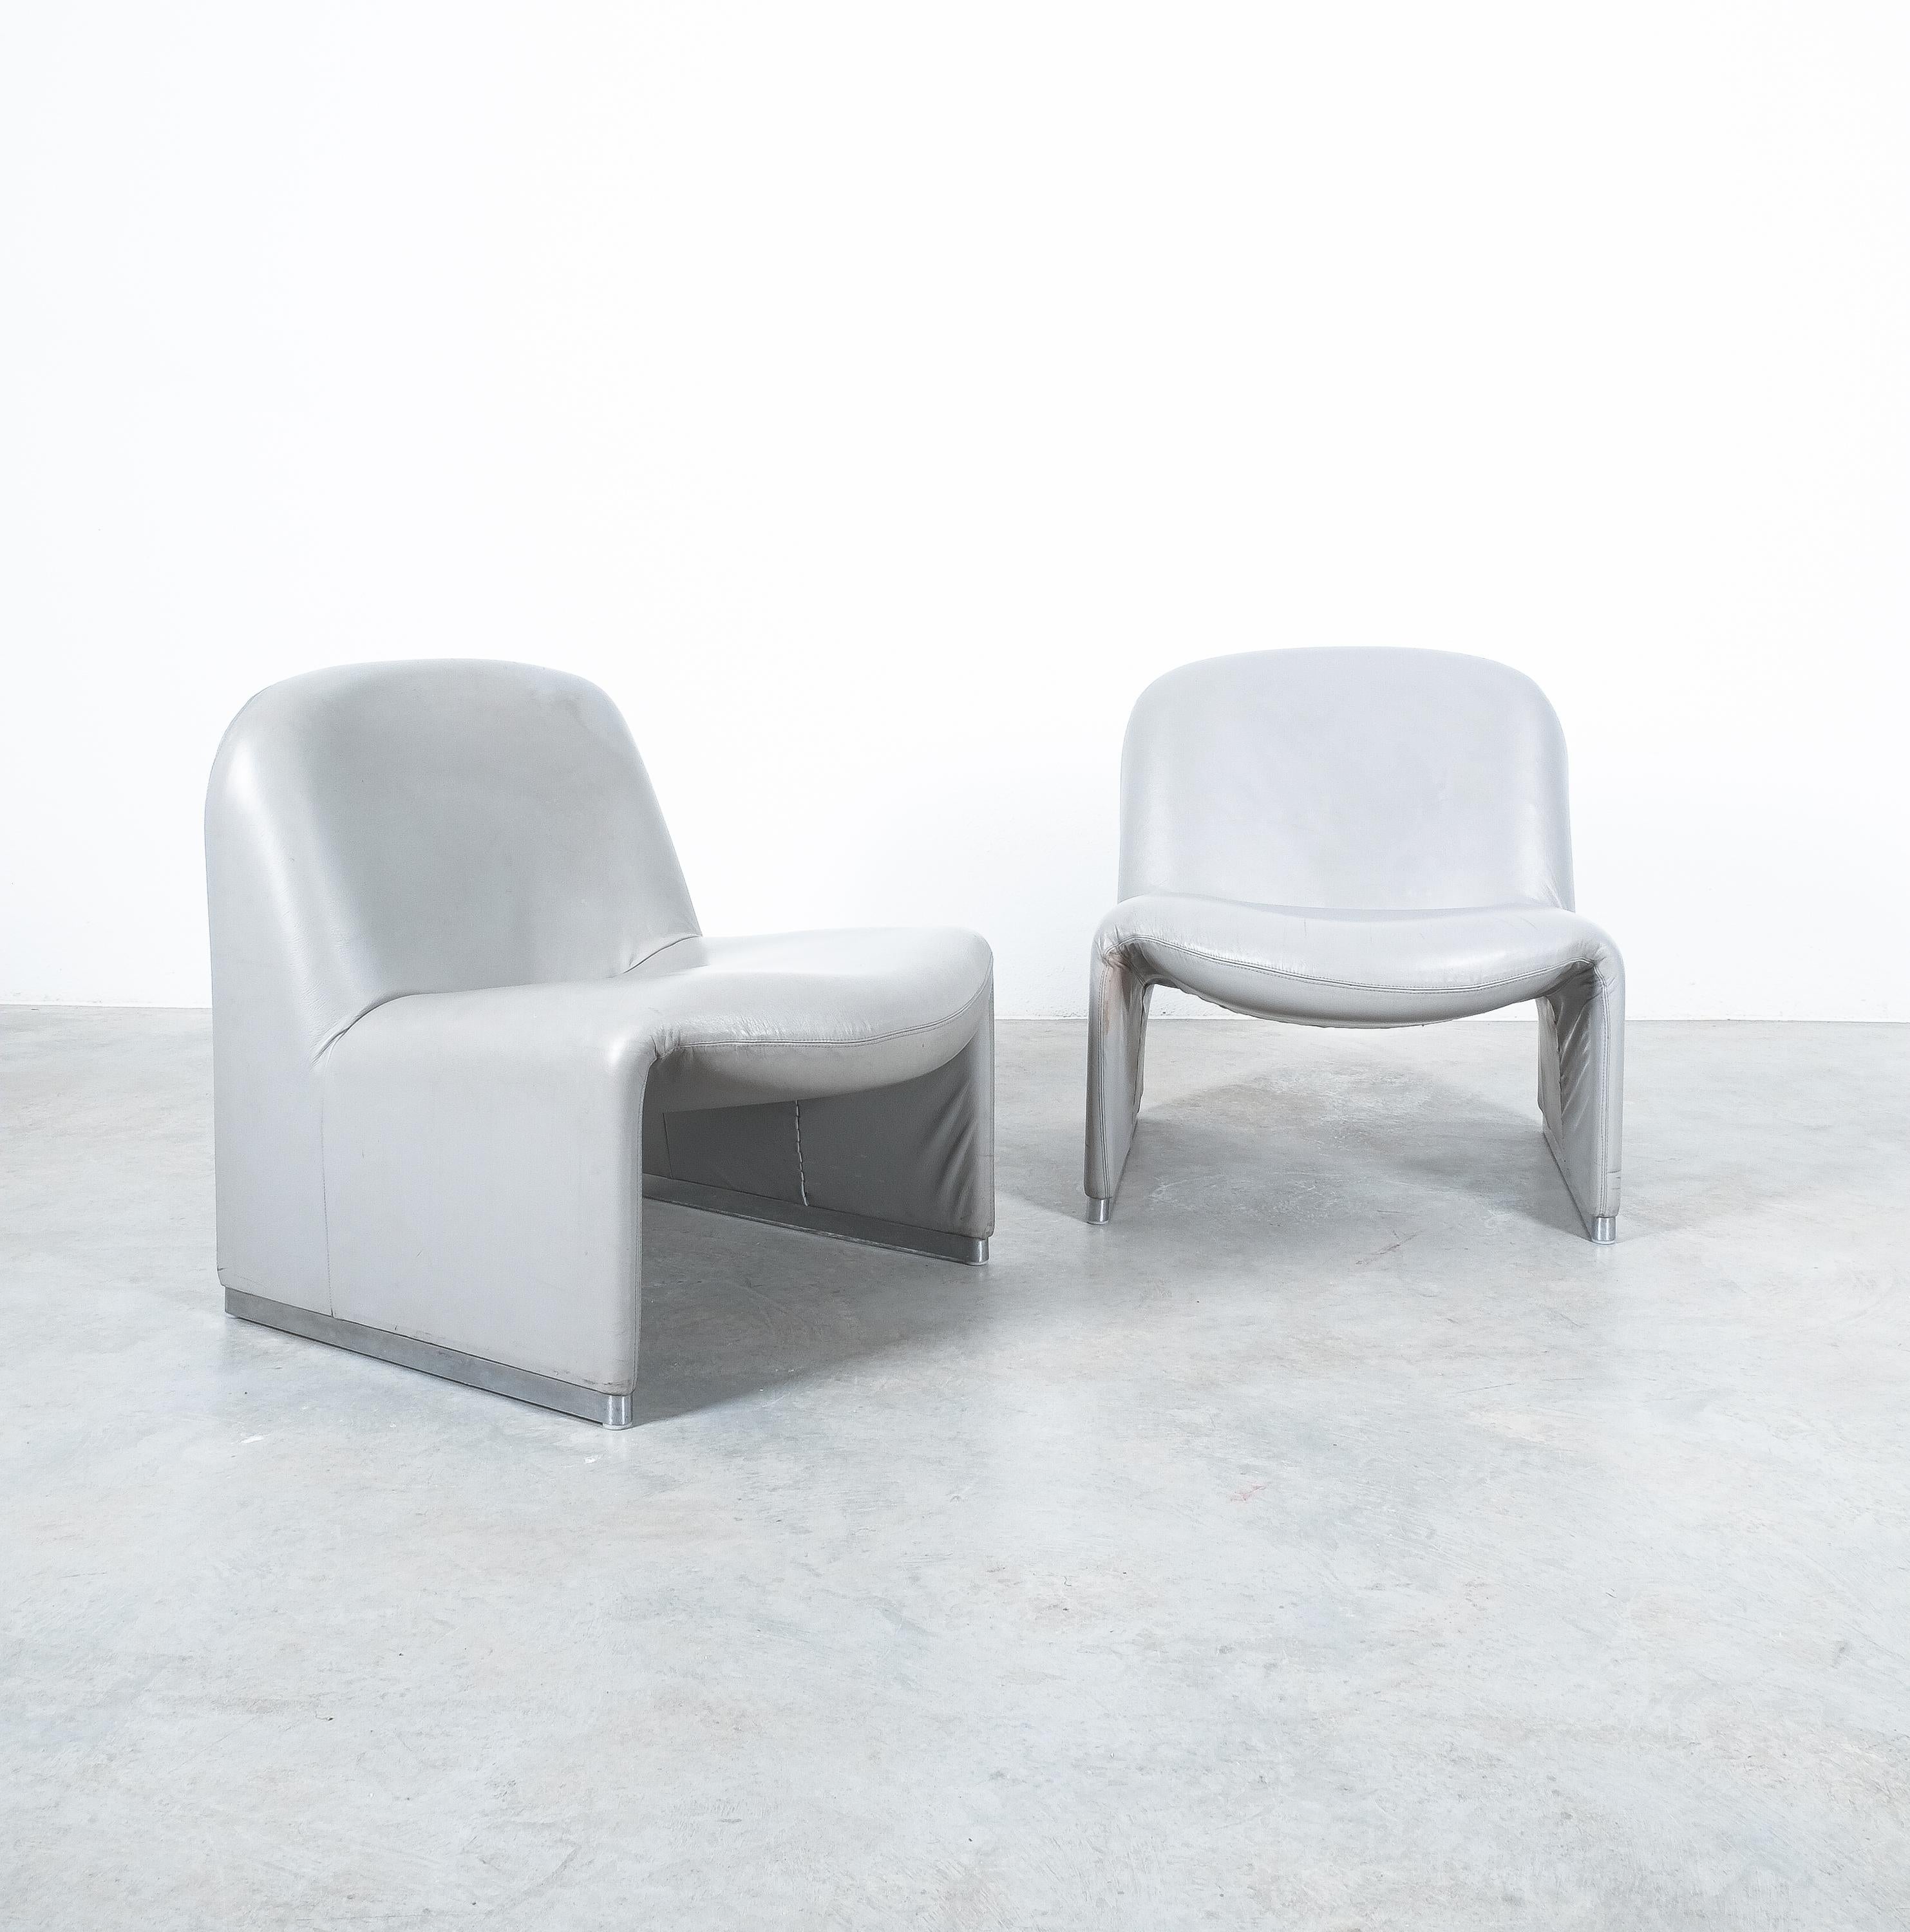 Aluminum Pair of Giancarlo Piretti “Alky” Grey Leather Chairs, Castelli, 1969